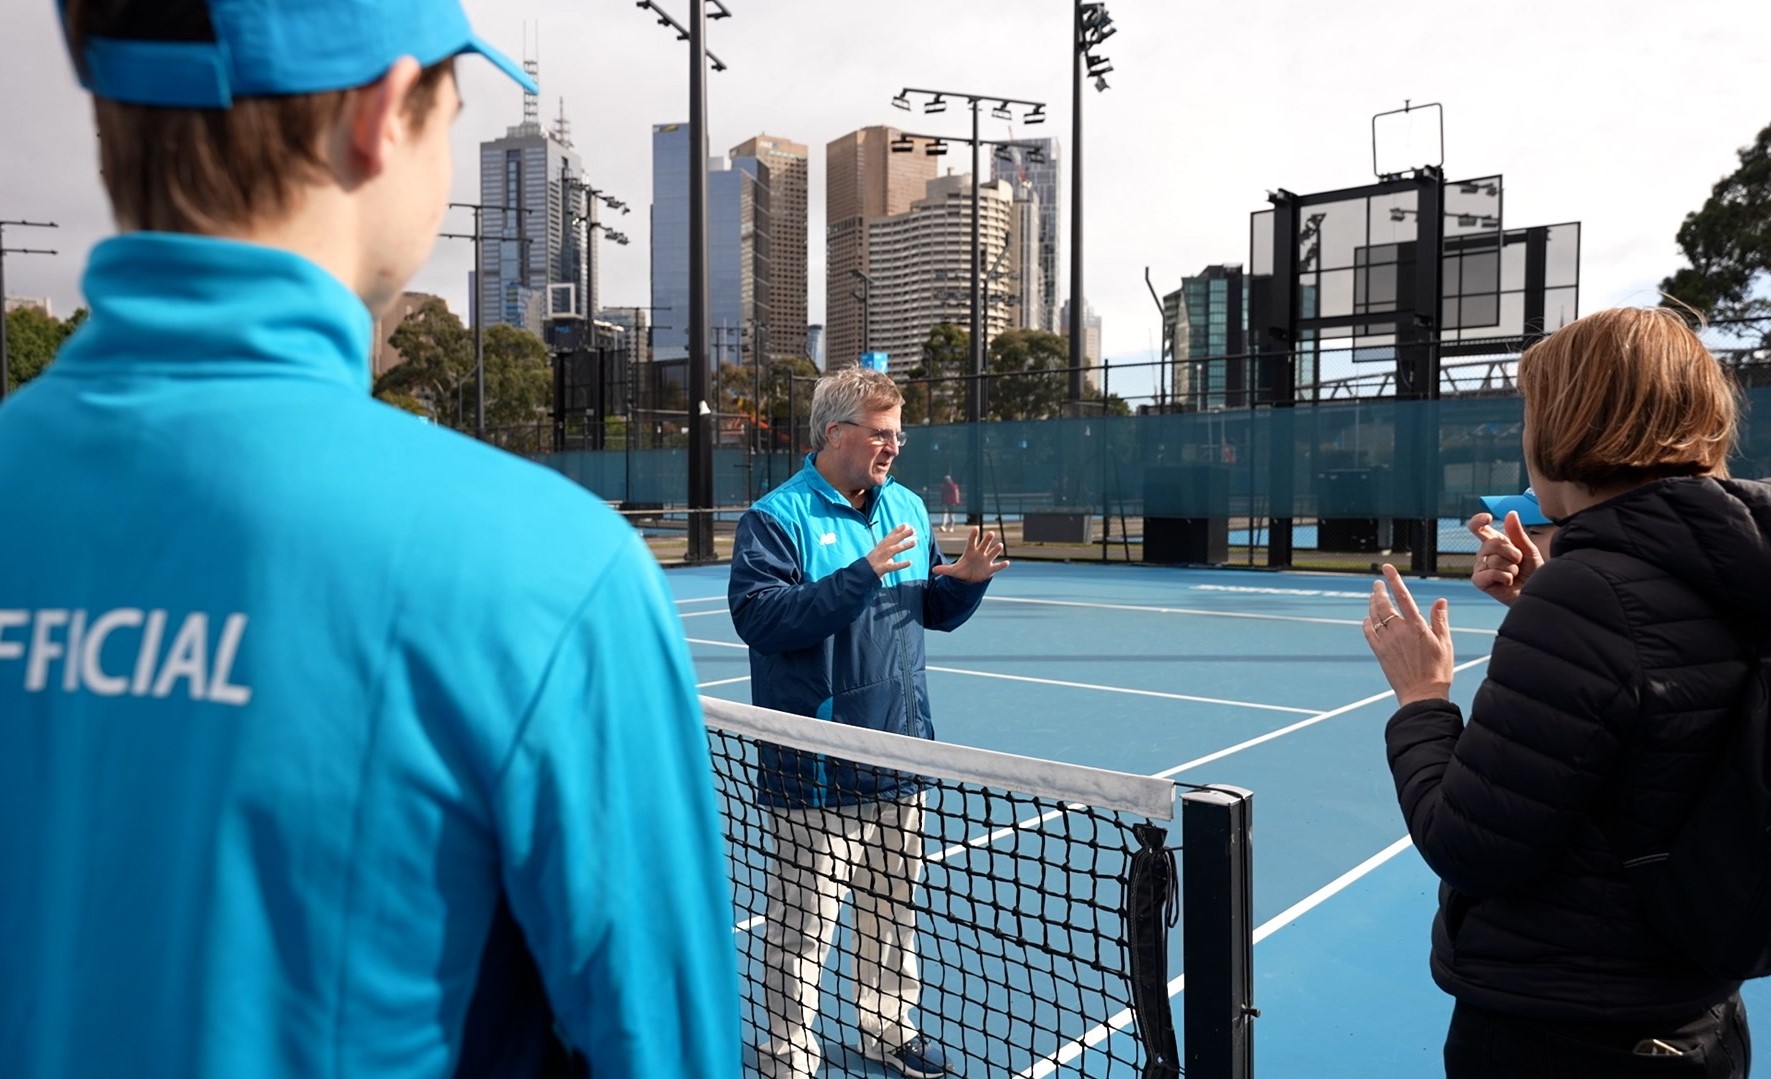 Male chair umpire signing to AusOpen staff at the Deaf and Hard of Hearing tournament